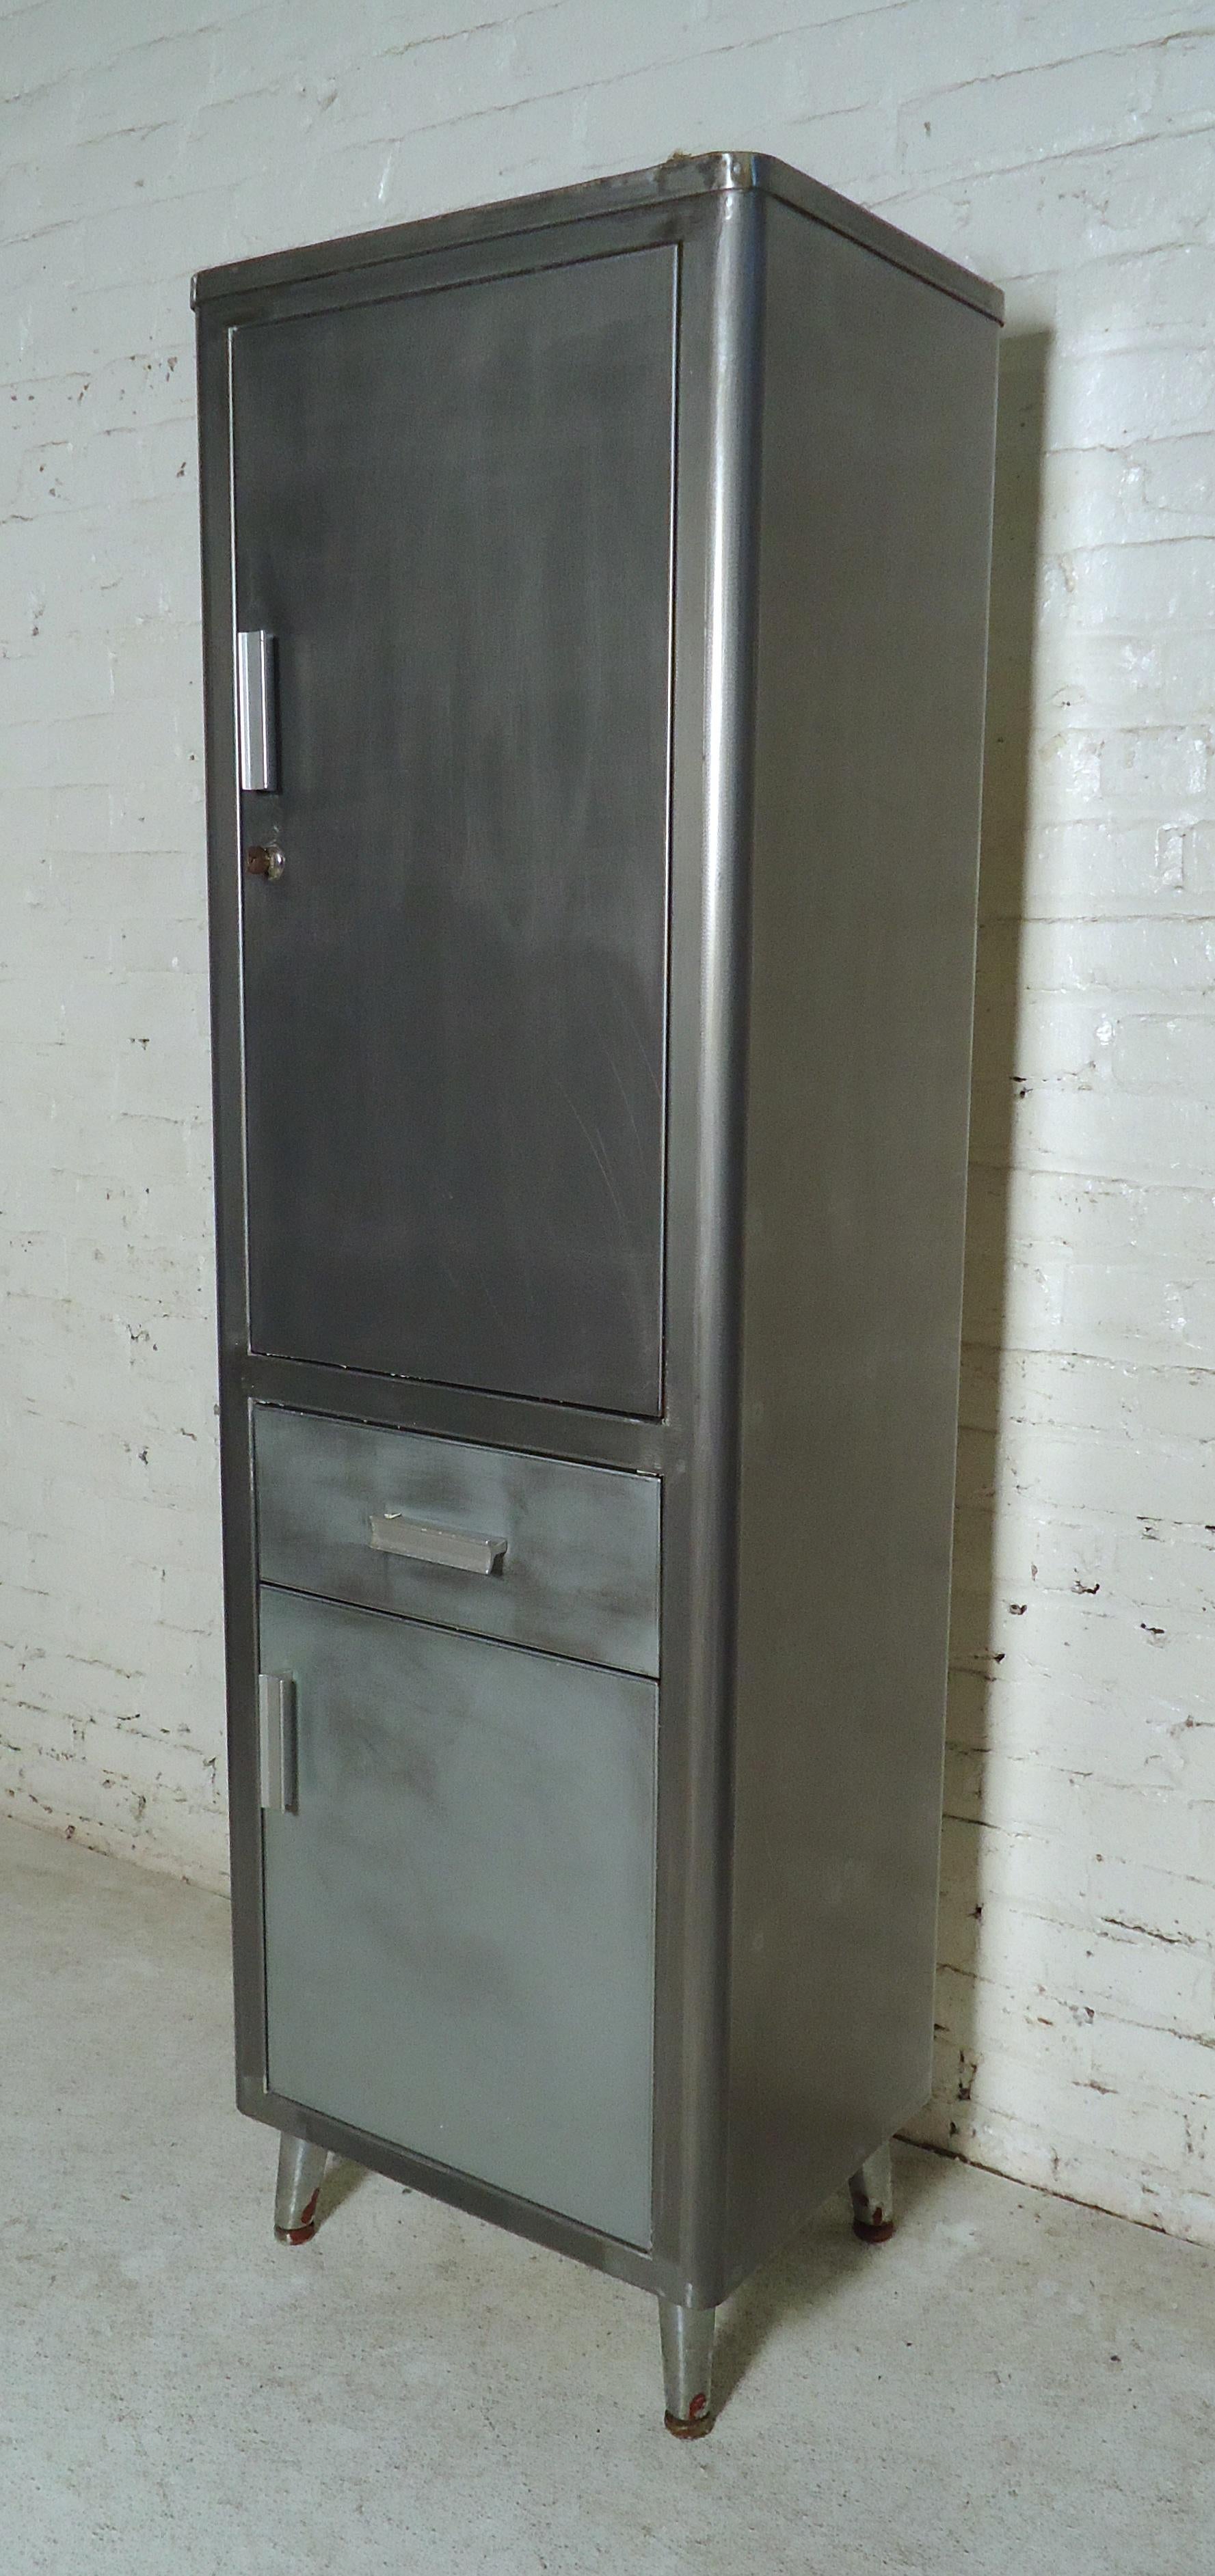 Unique industrial cabinet featuring one drawer and two spacious storage cabinets with removable shelves.

(Please confirm item location - NY or NJ - with dealer).